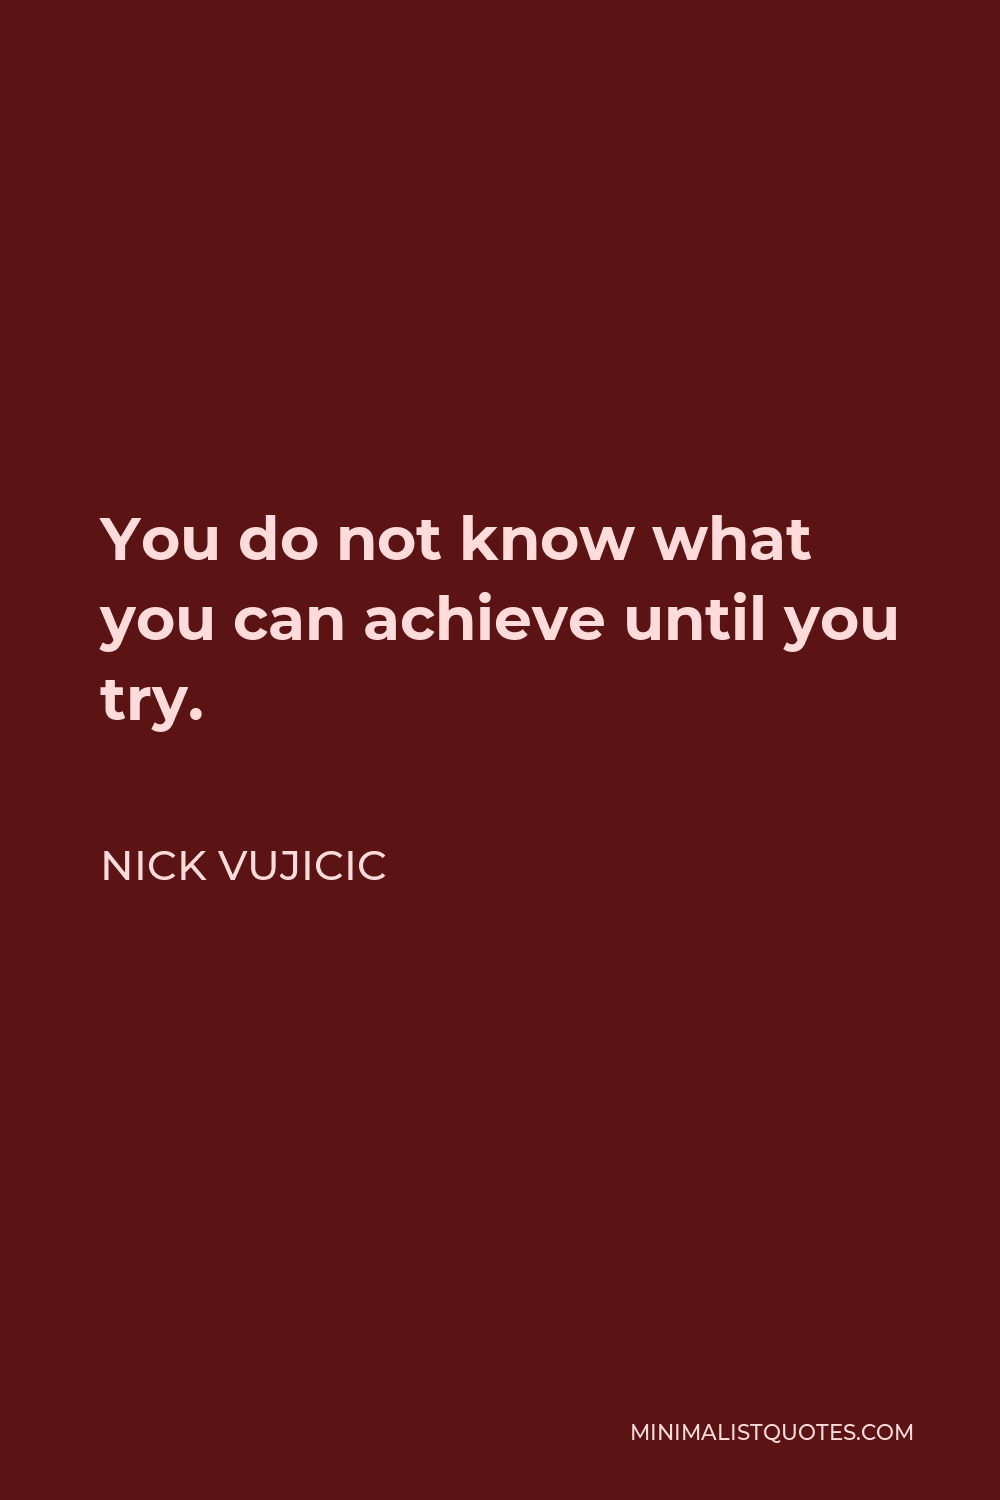 Nick Vujicic Quote - You do not know what you can achieve until you try.